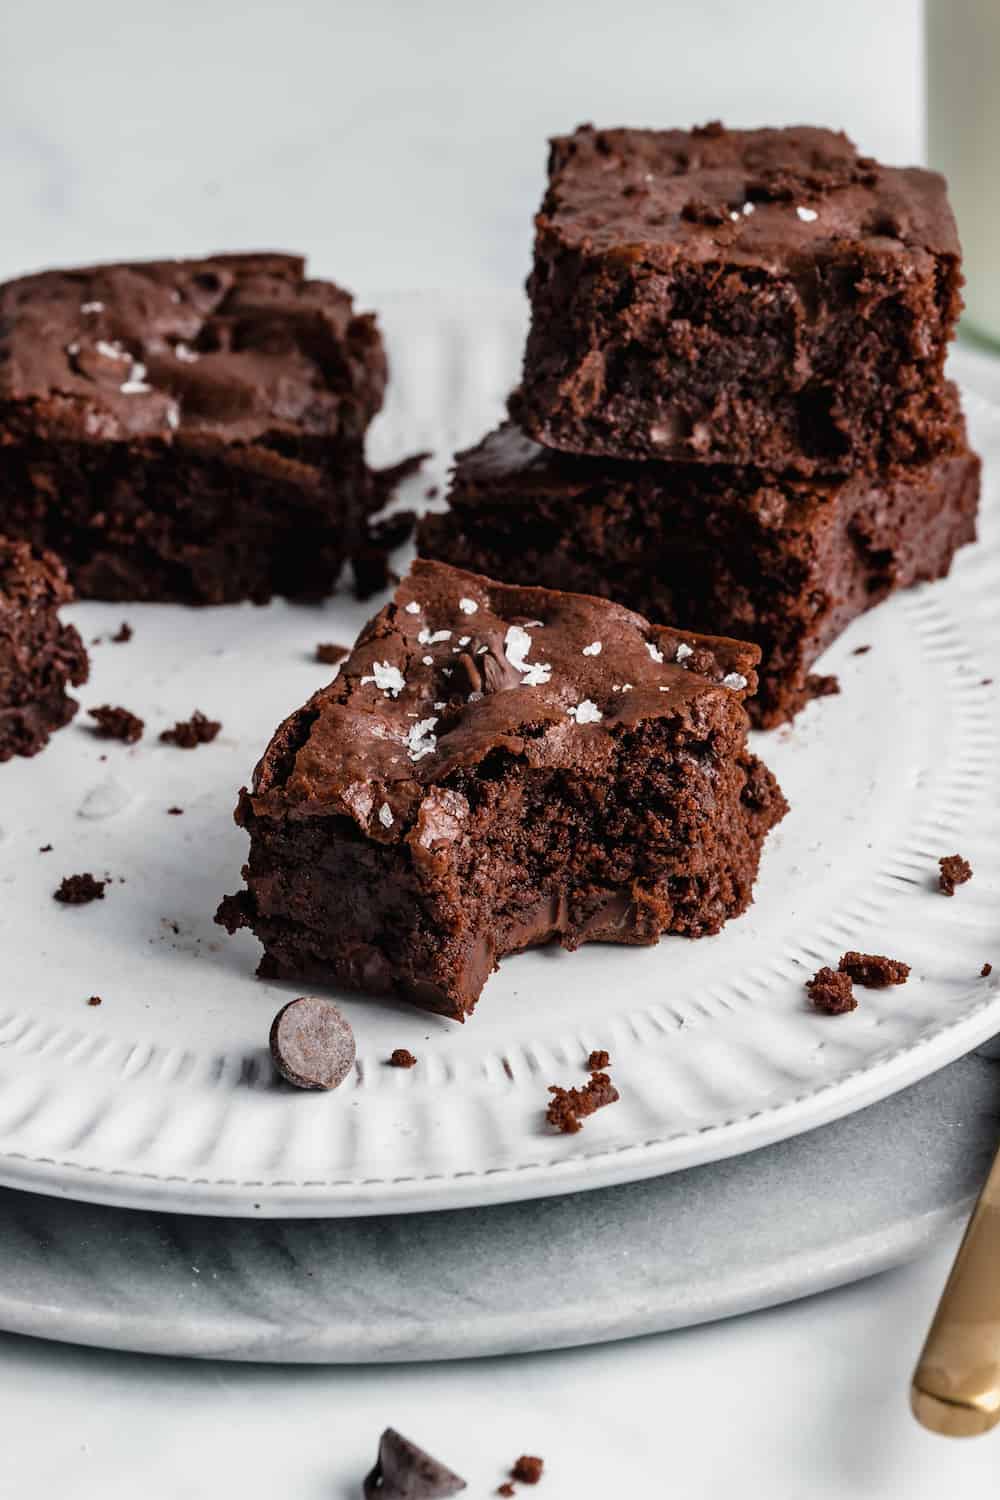 Plate of chocolate chip brownies.